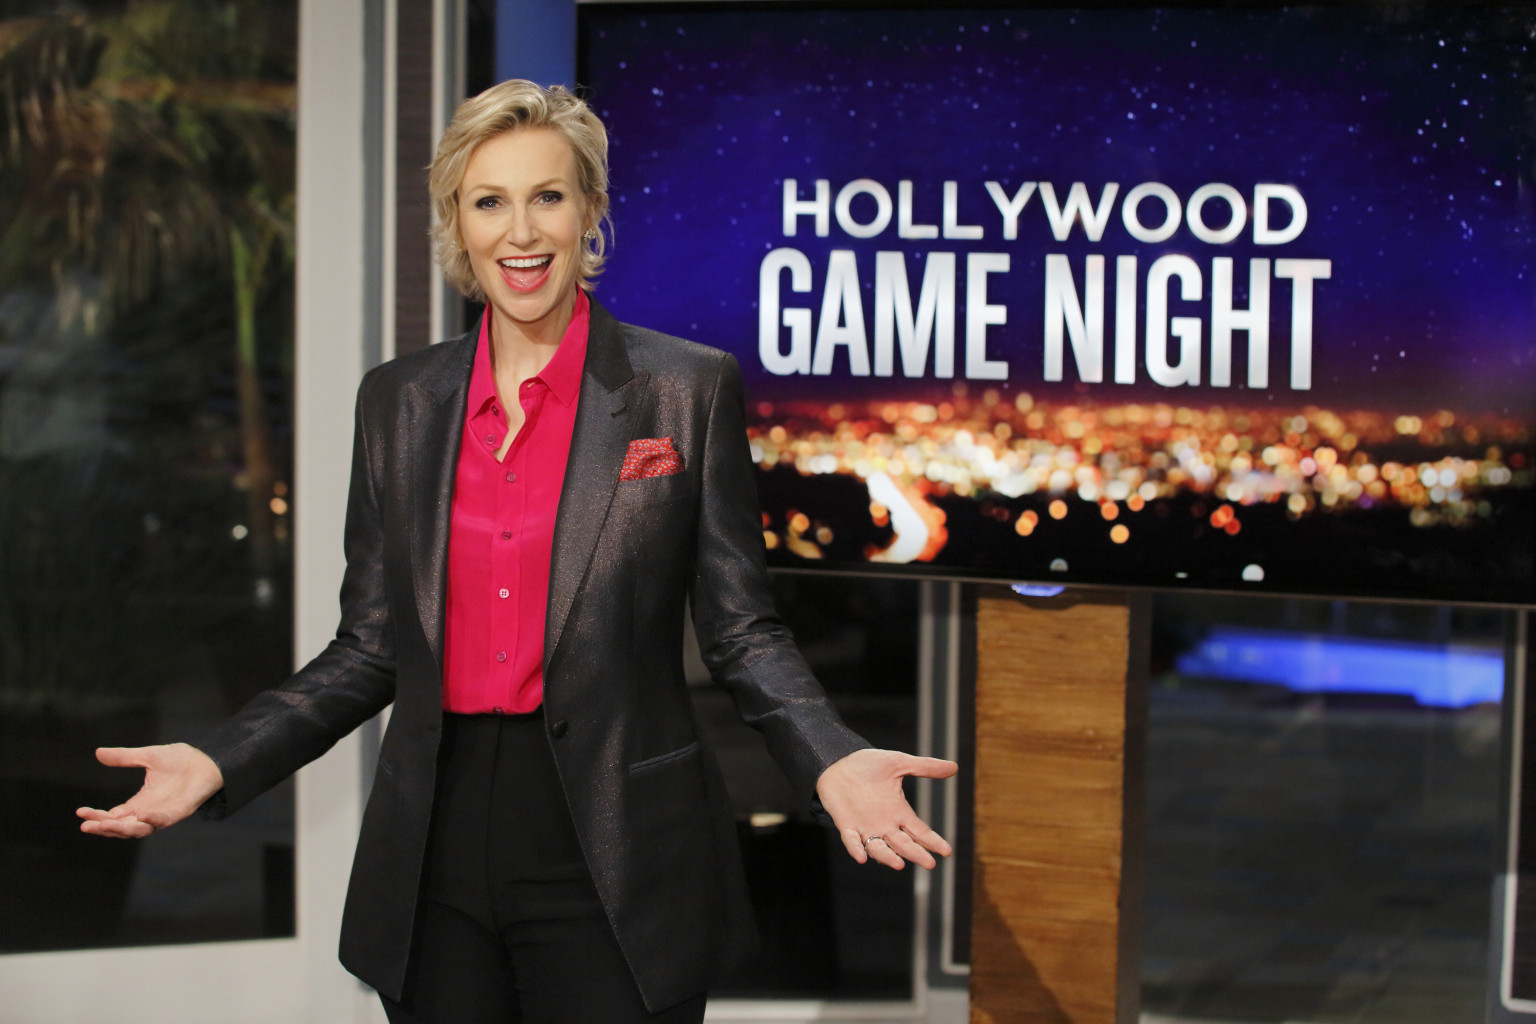 #39 Hollywood Game Night #39 Premiere: Host Jane Lynch Previews New Series